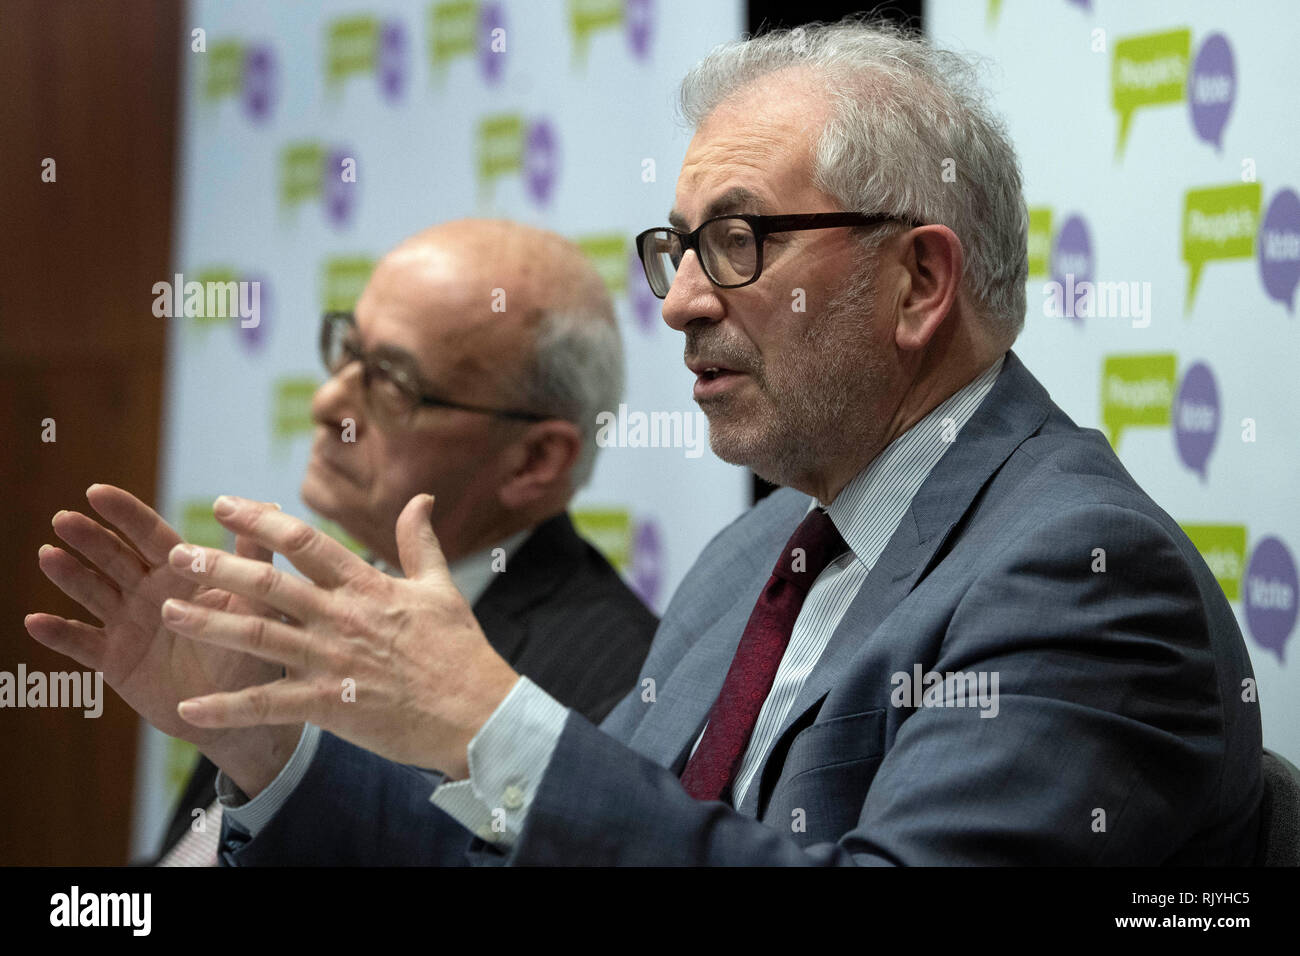 Lord Kerr (left) and Lord Kerslake at IET London at the launch of a new report from the People's Vote campaign showing how the Blindfold Brexit being supported by both Theresa May and Jeremy Corbyn offers no clarity and so brings no closure to the Brexit debate. Stock Photo